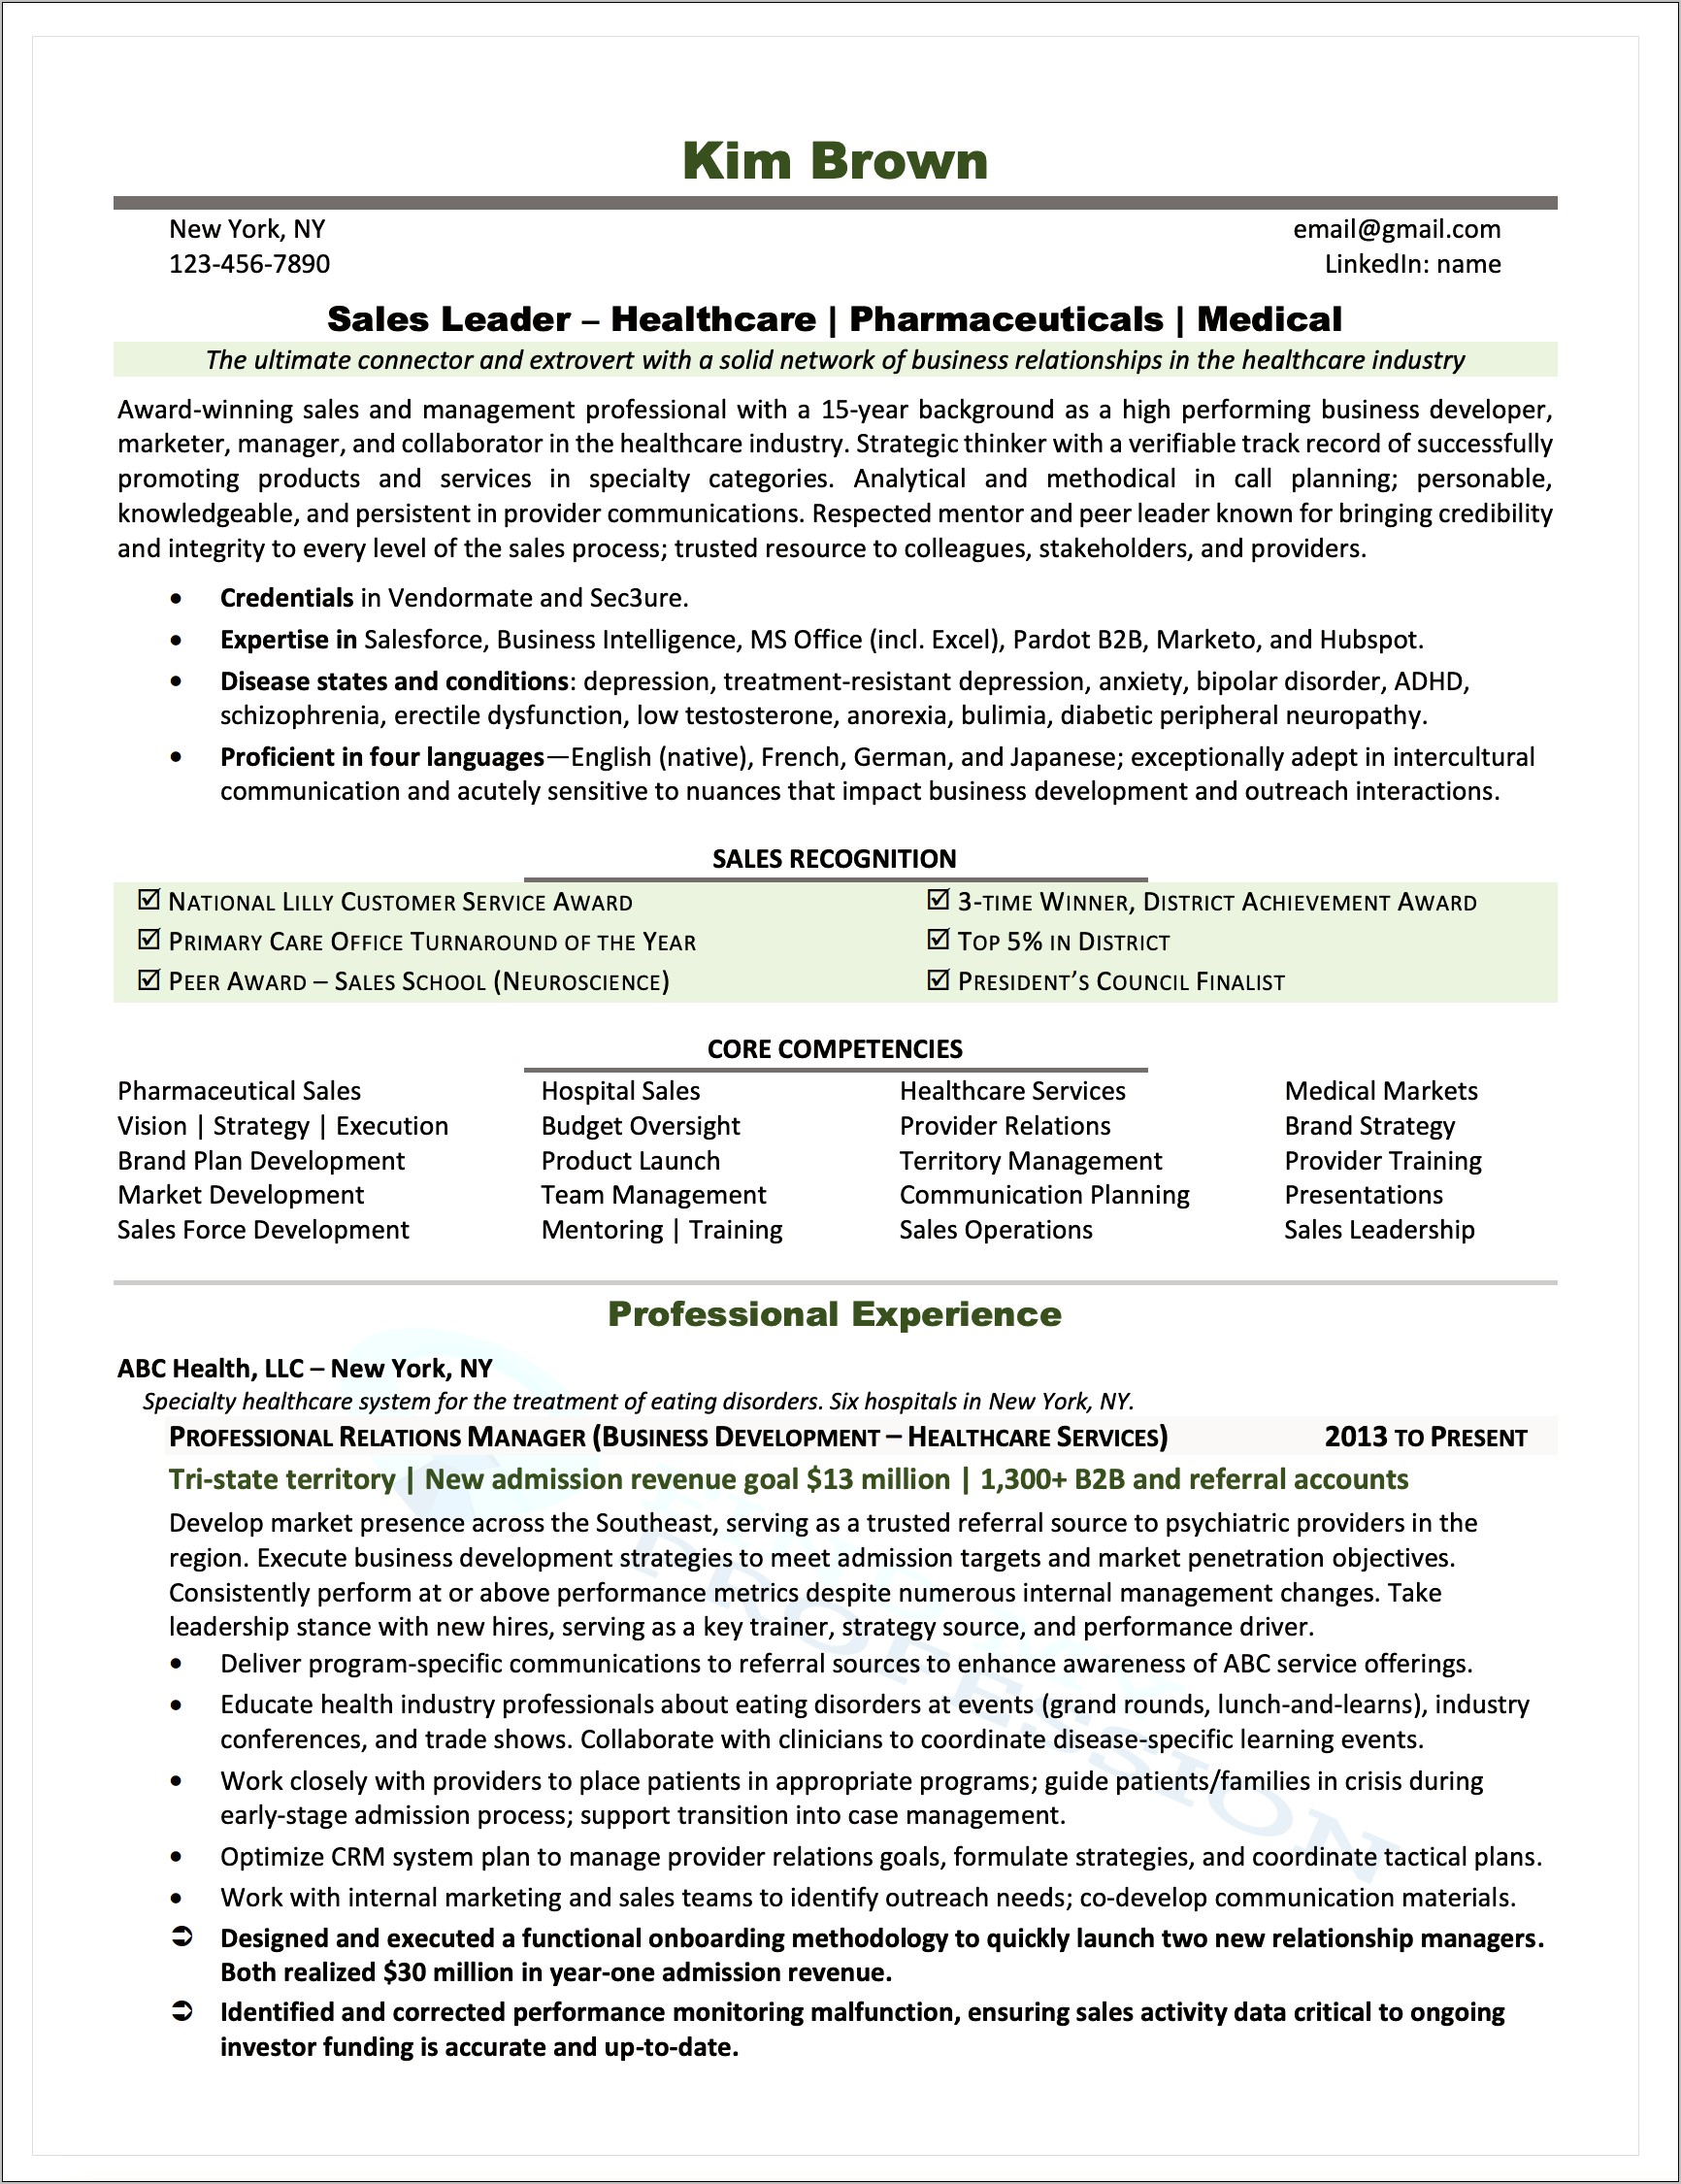 Resume Example For Vp Of Operations